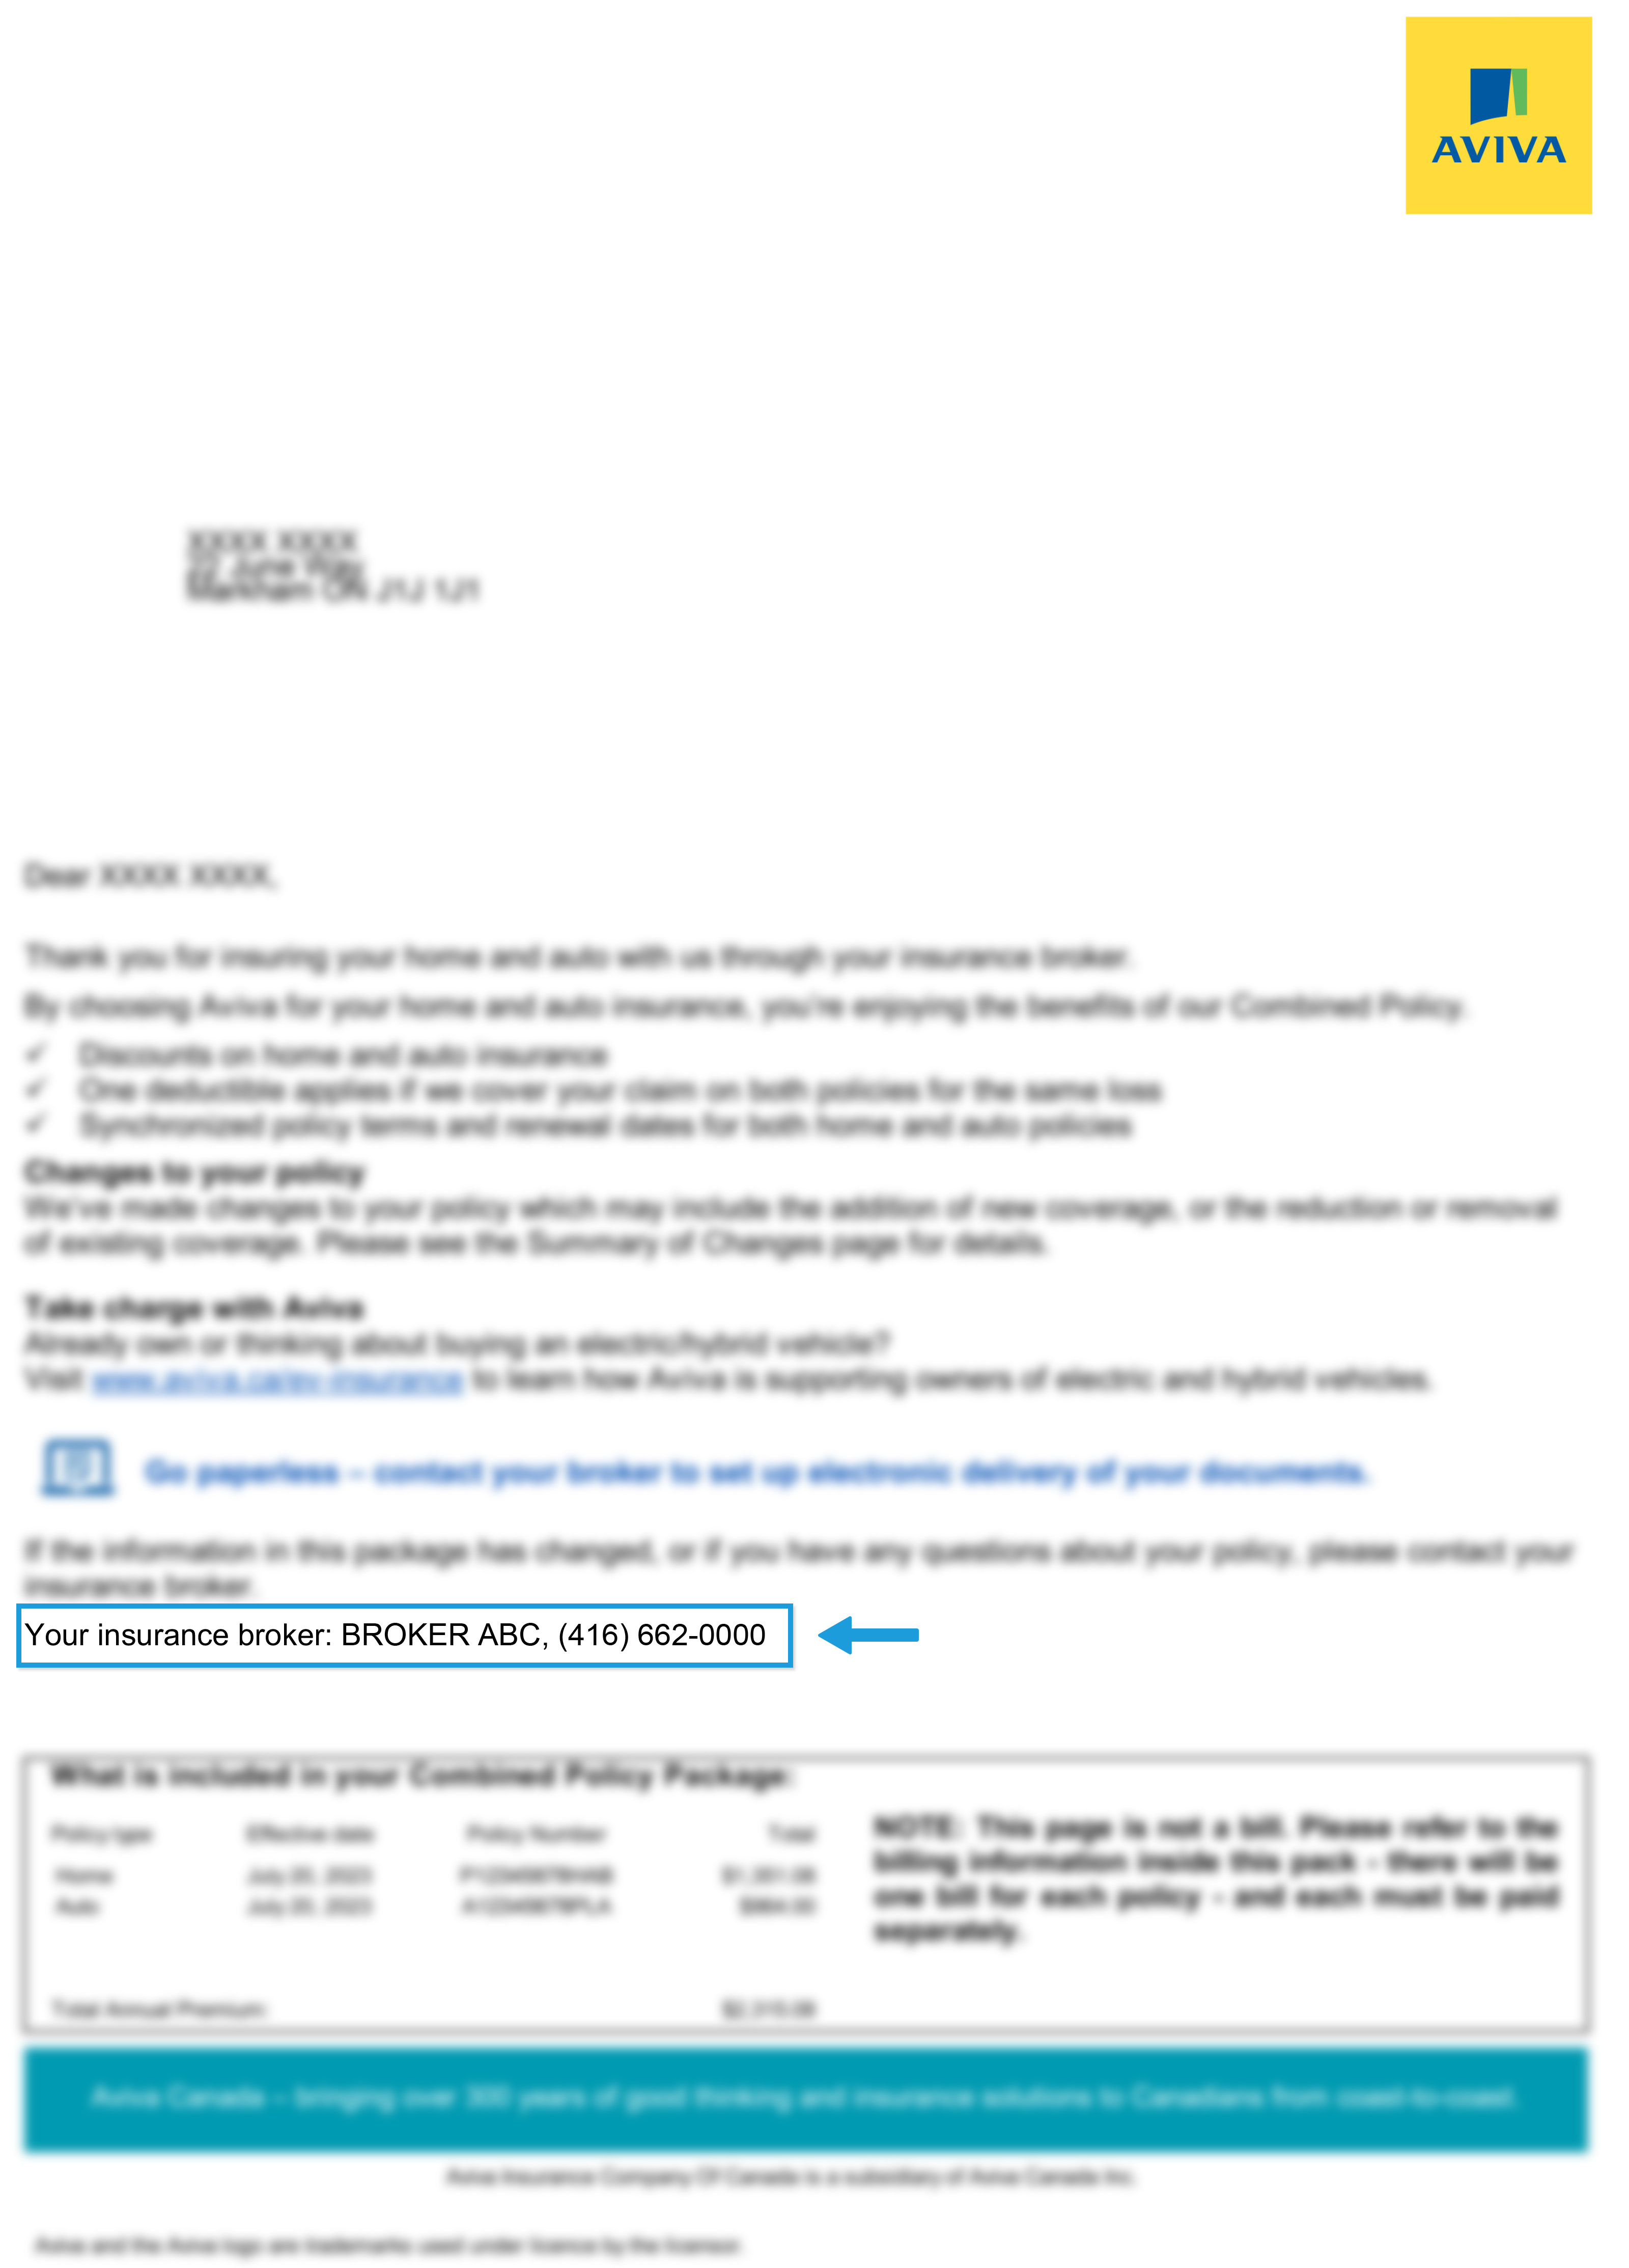 Blurred broker policy document highlighting Your Insurance Broker details